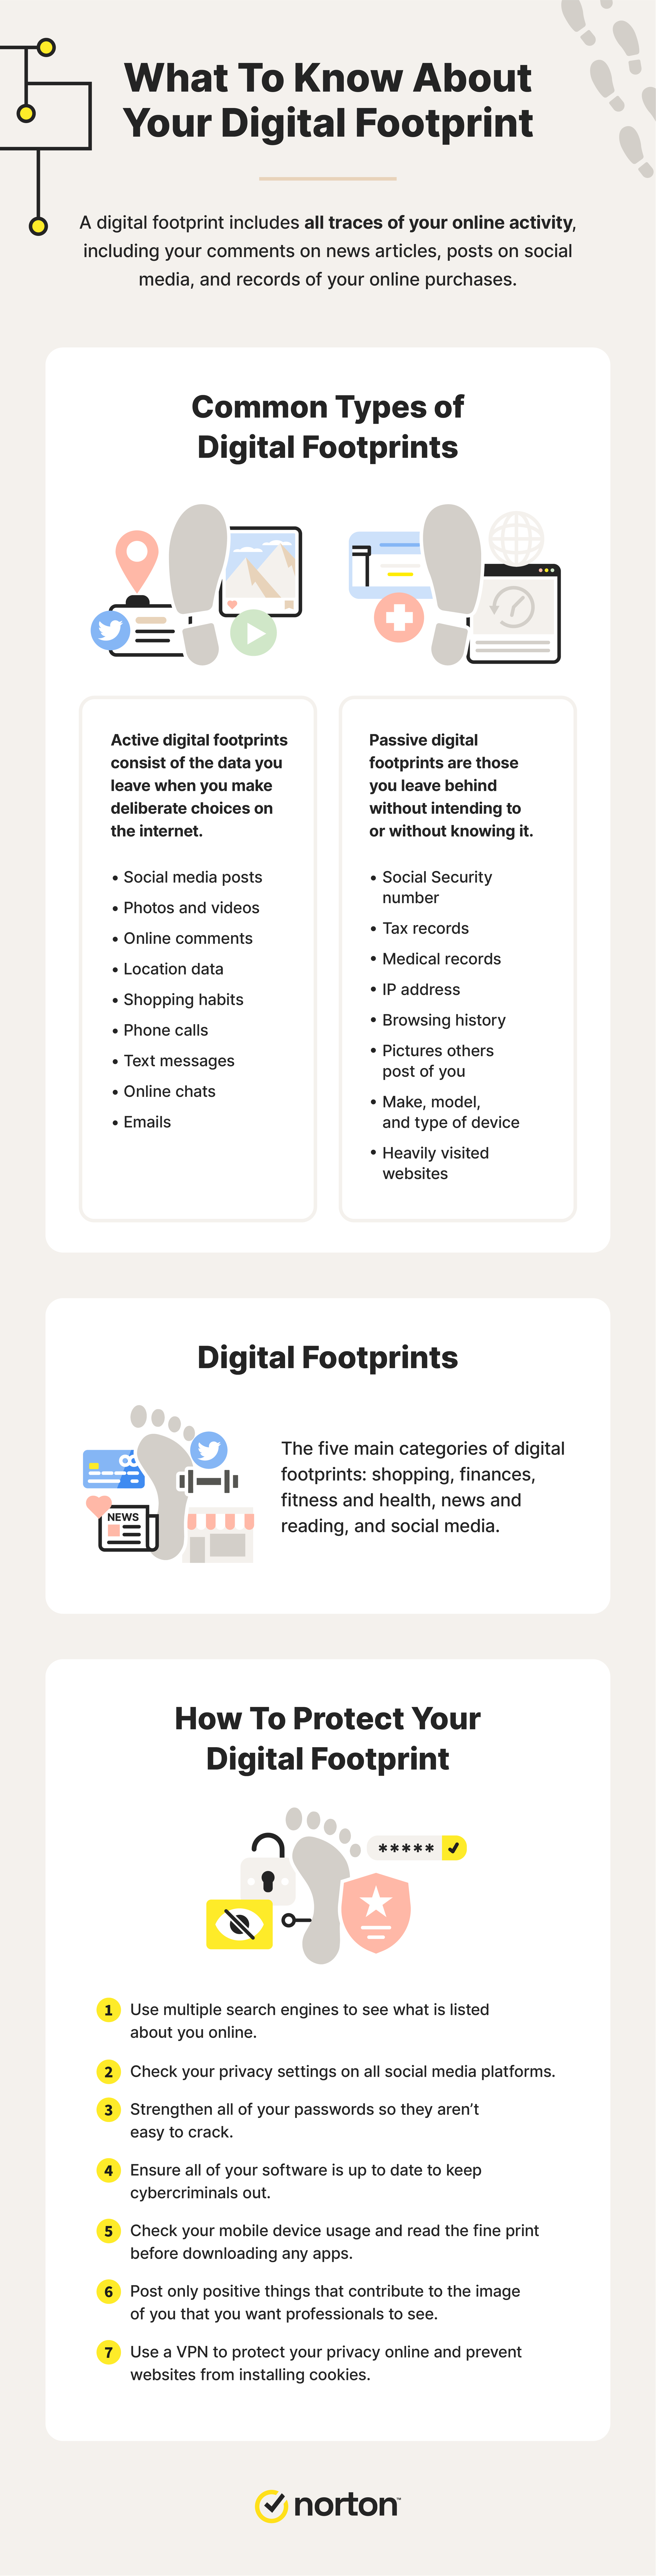 Infographic showing everything you need to know about your digital footprint.